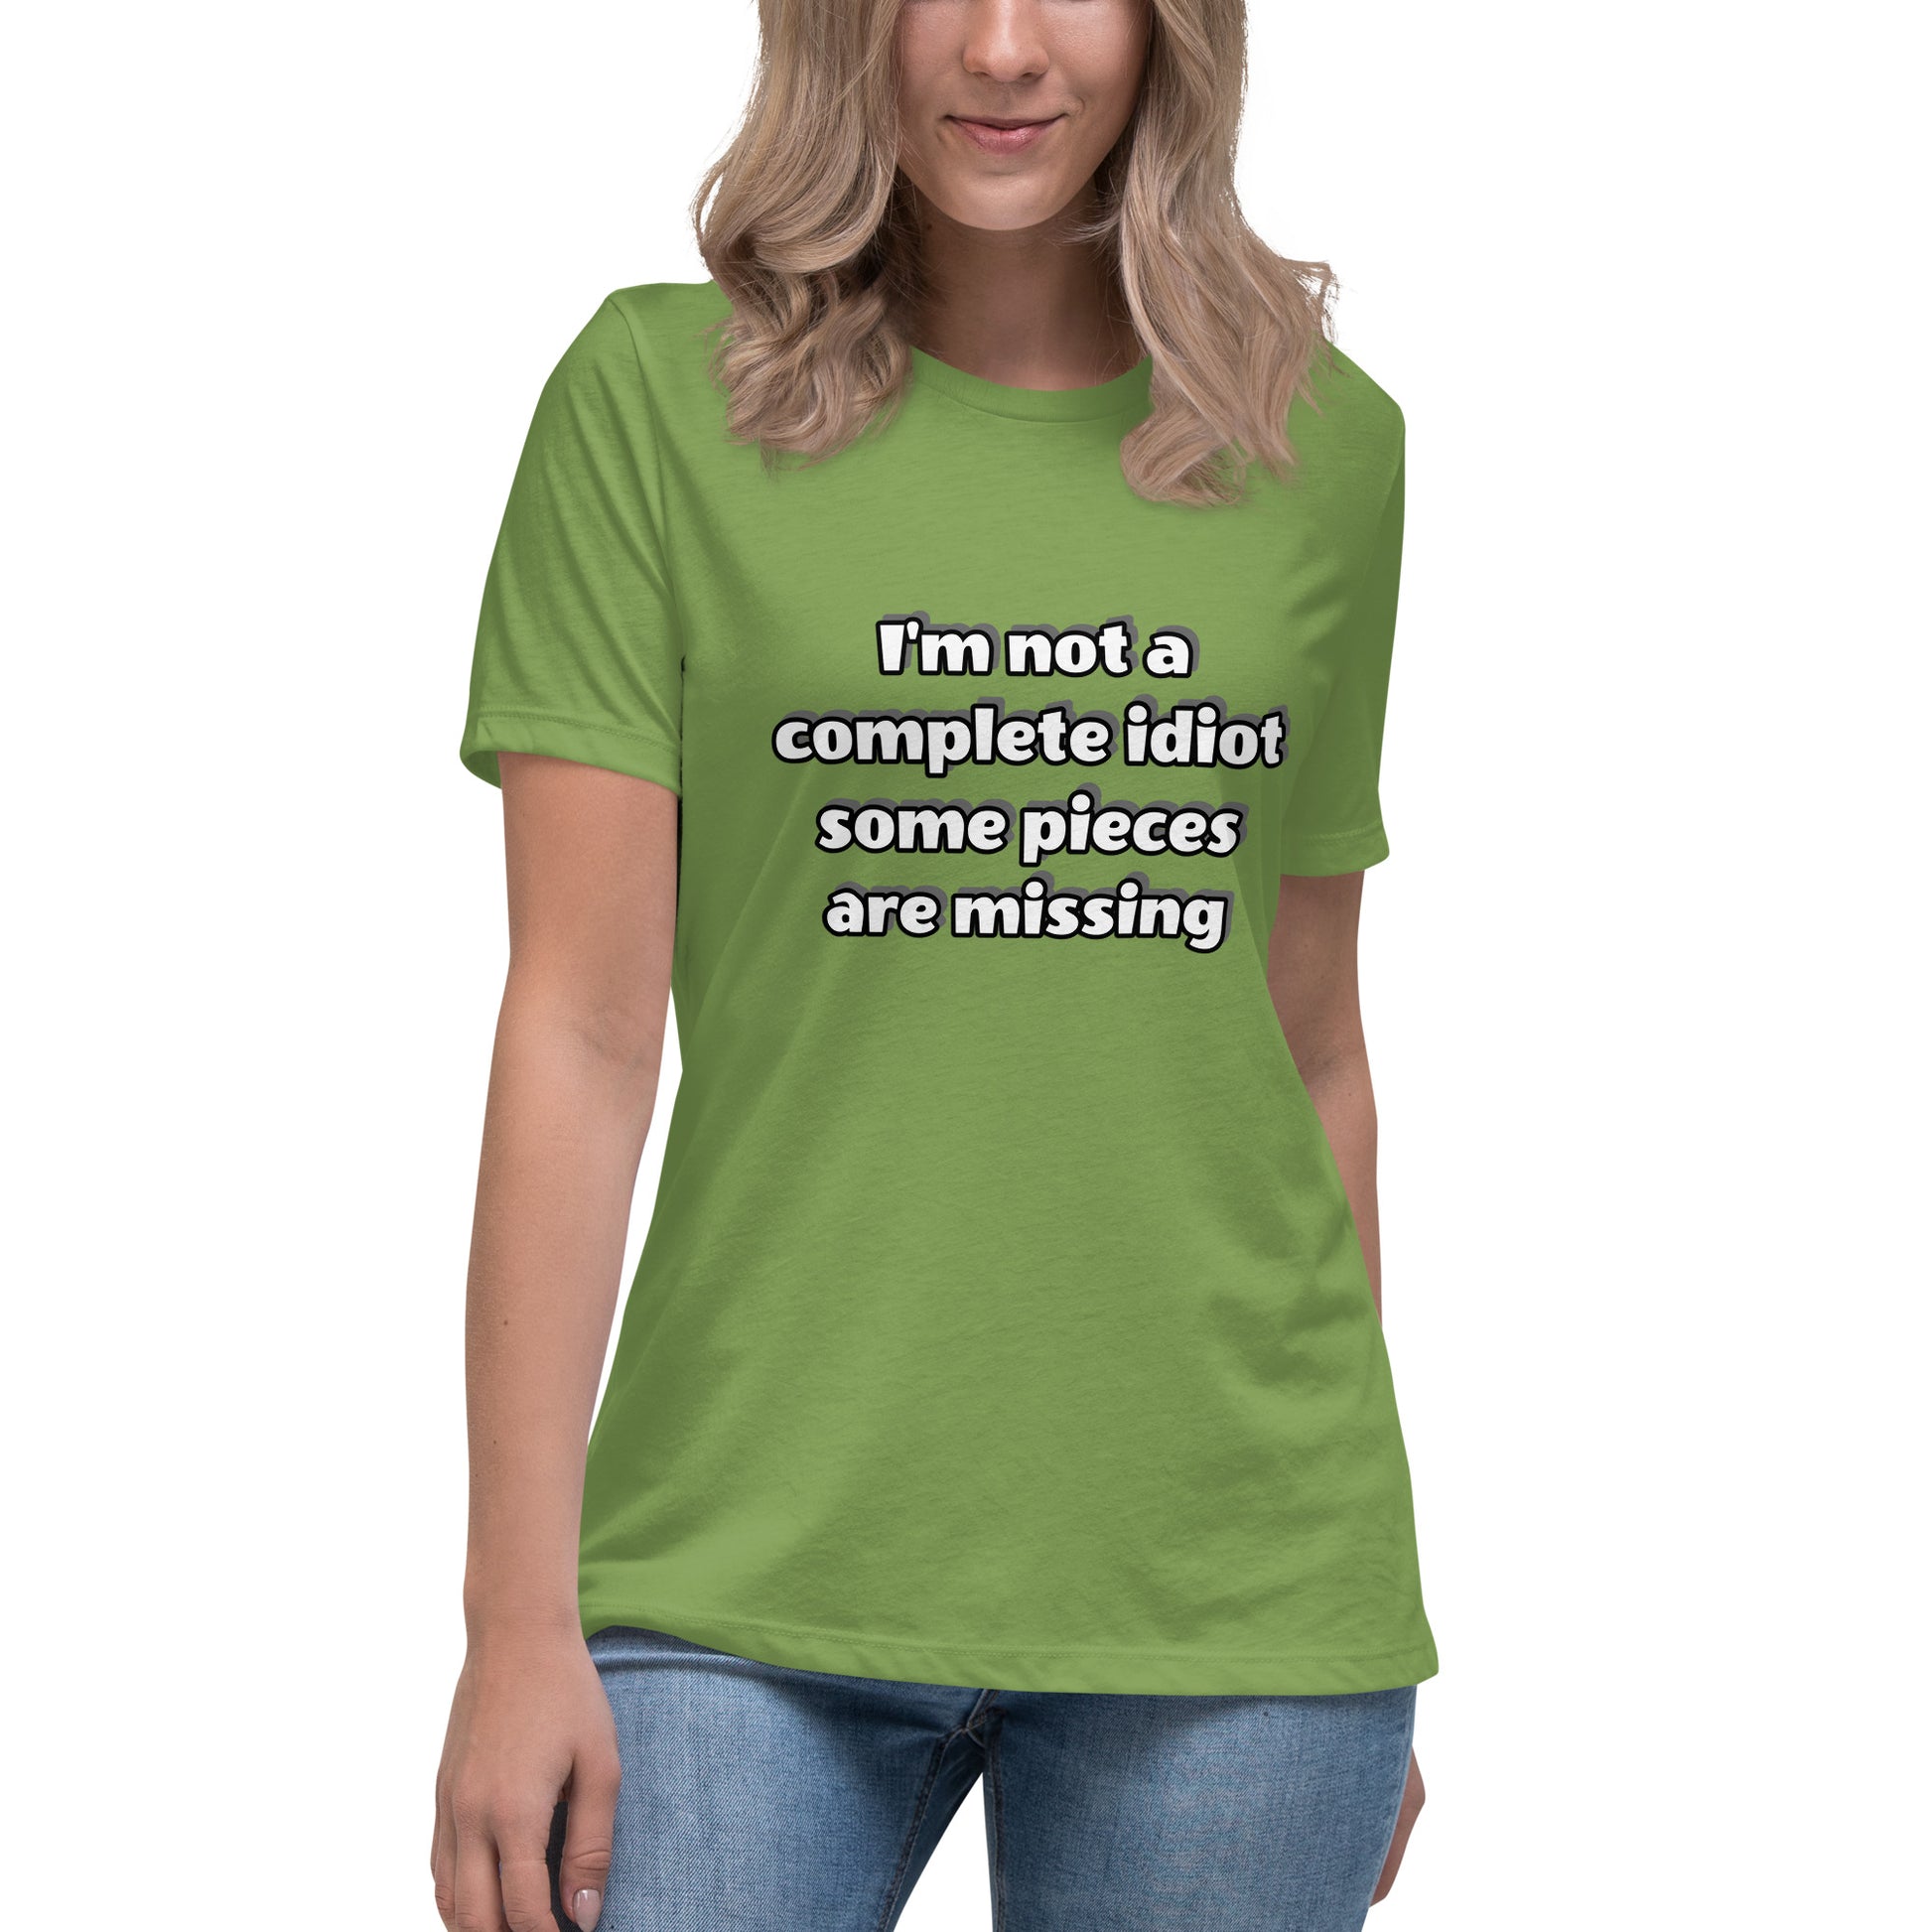 Women with leaf green t-shirt with text “I’m not a complete idiot, some pieces are missing”